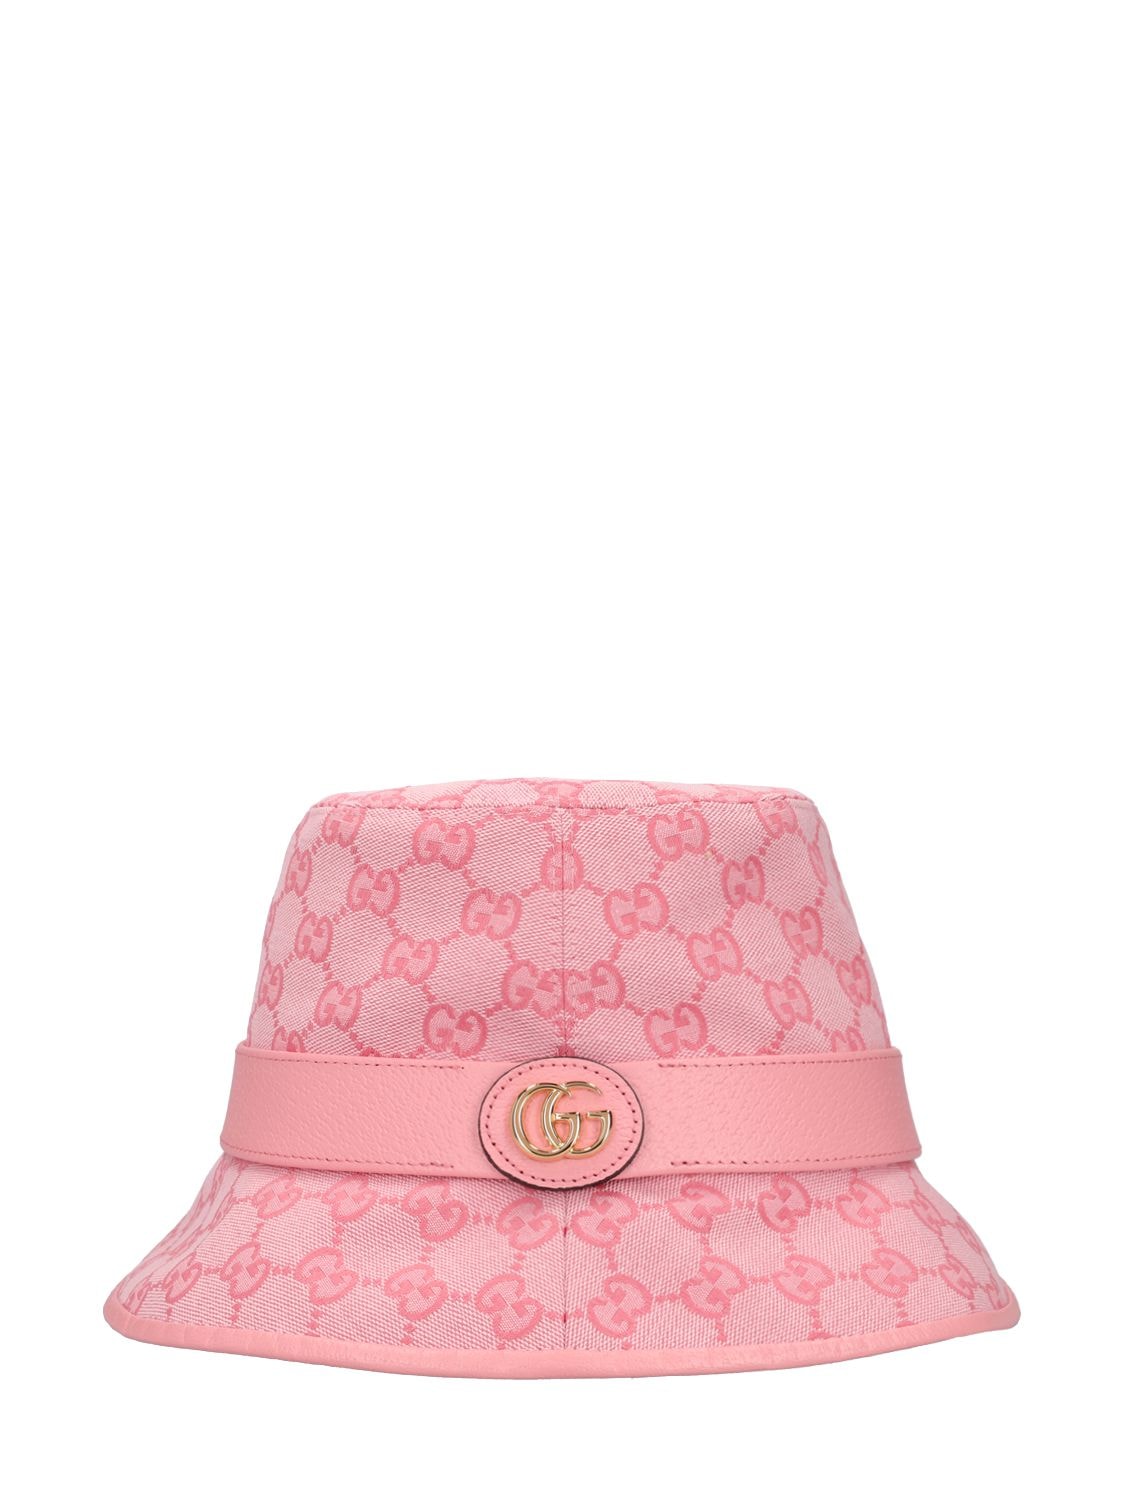 Image of Gg Jago Cotton Blend Canvas Bucket Hat